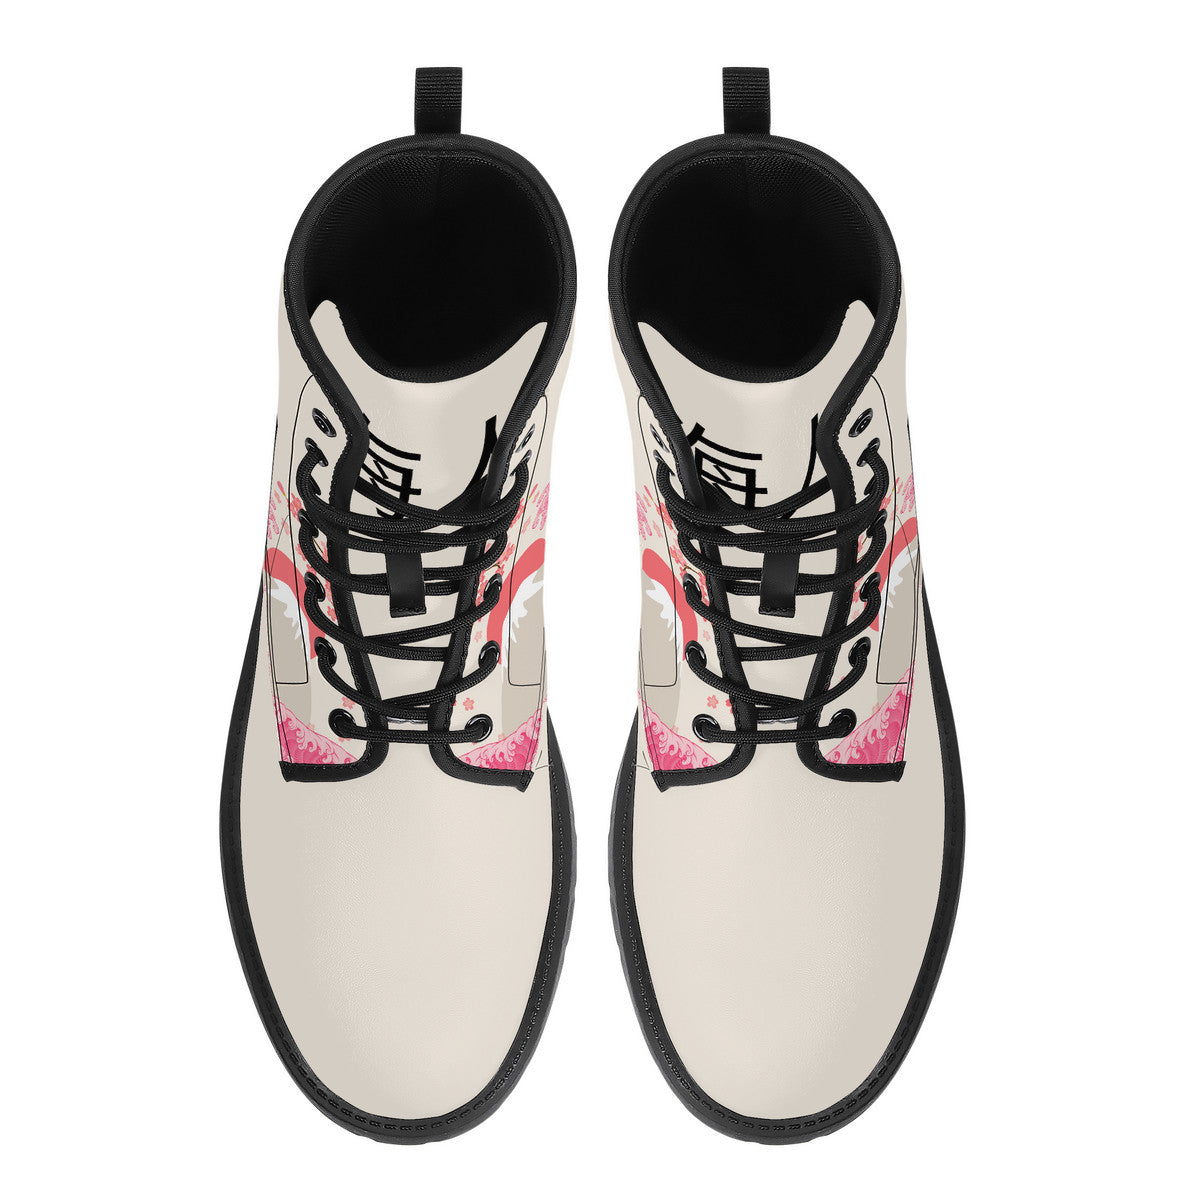 The Pink Great Wave Vegan Leather Boots